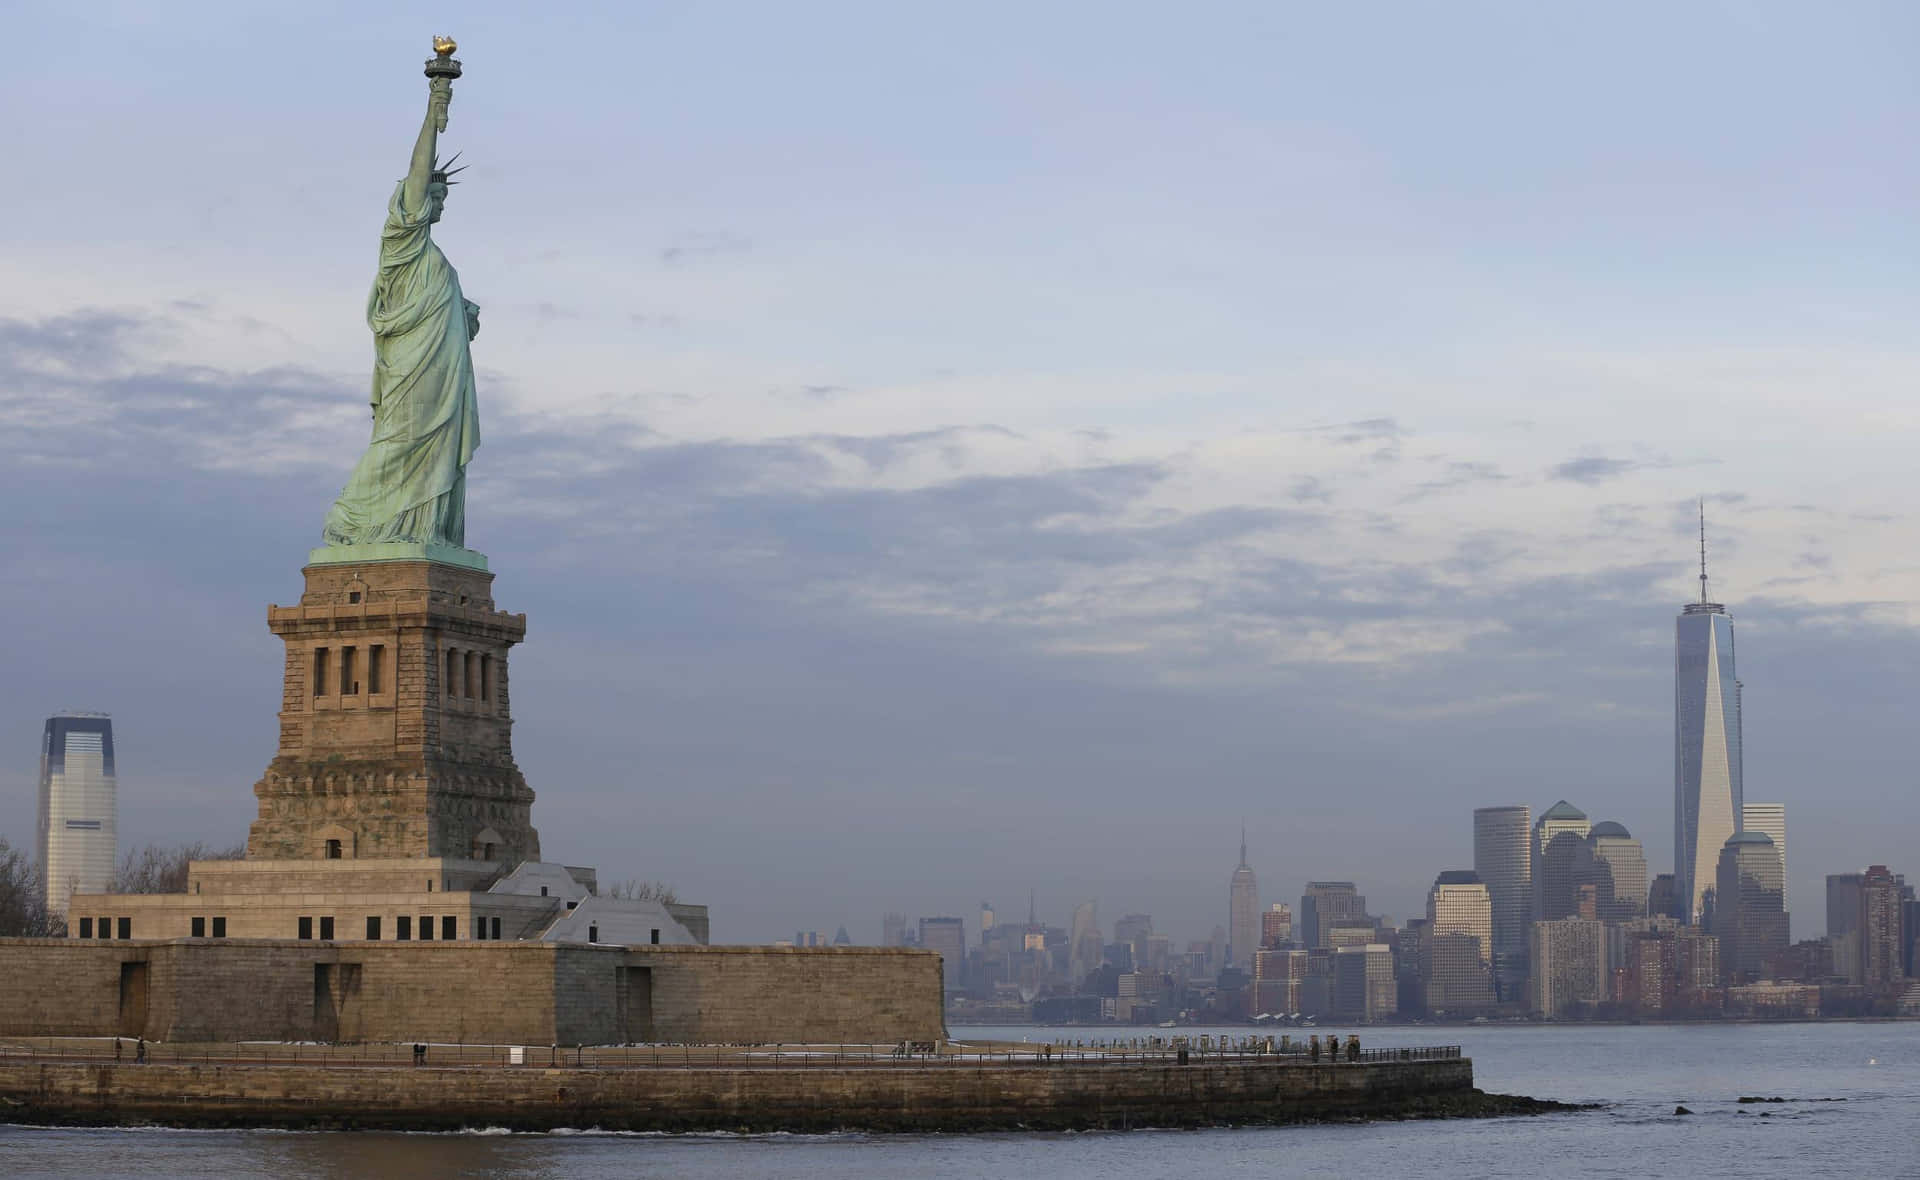 The Symbolic Statue of Liberty in New York